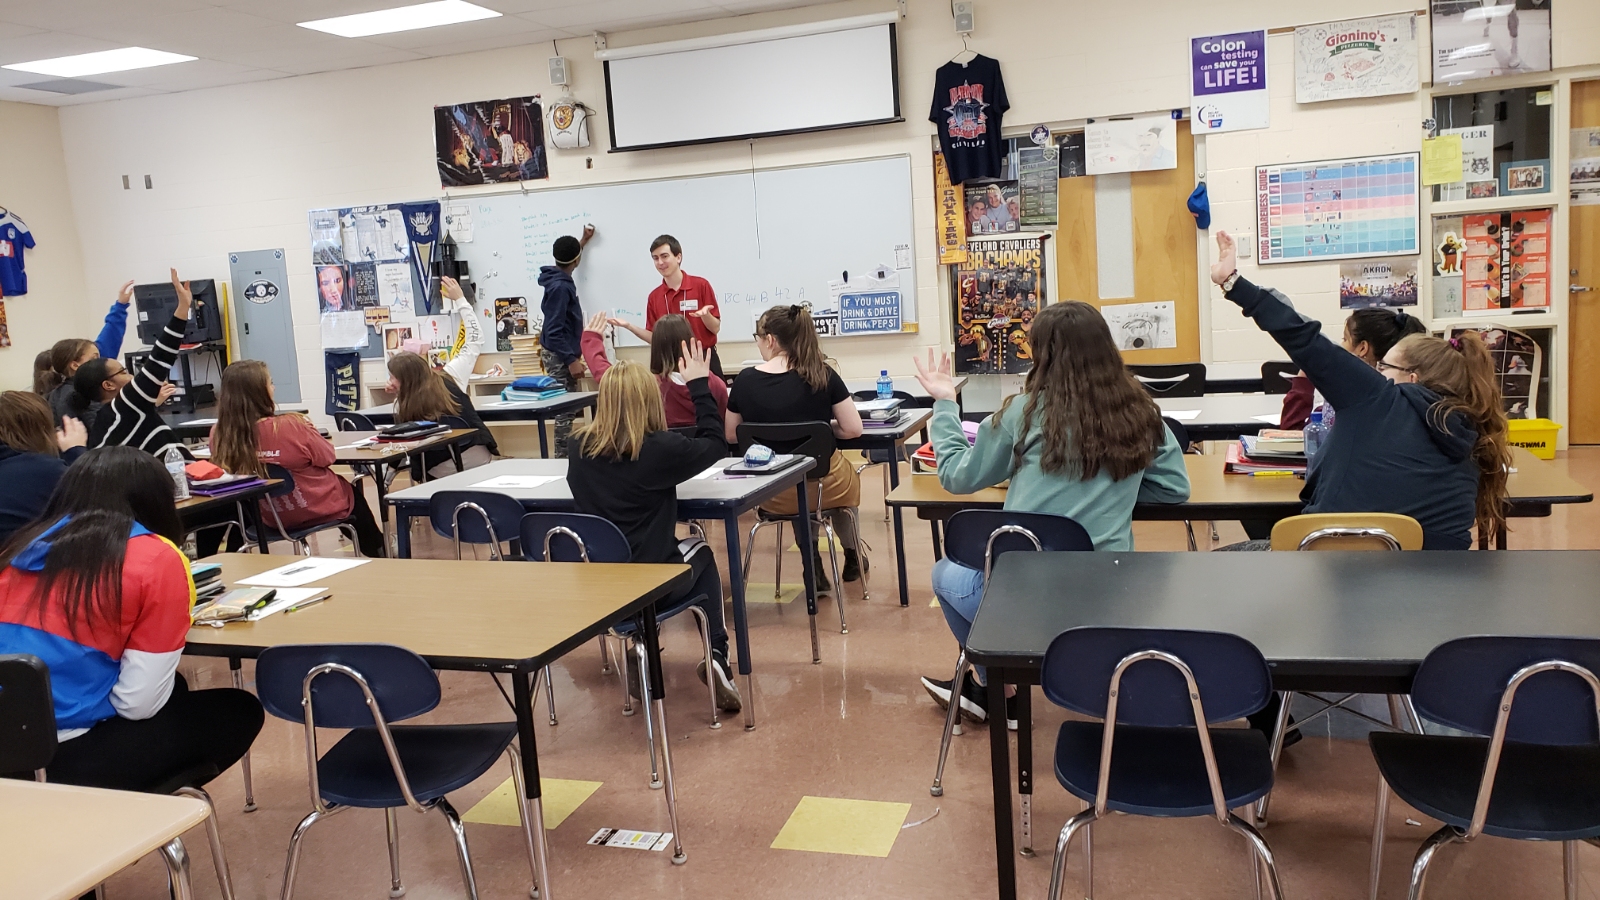 Candidate for State Representative, Nathan Jarosz, teaches leadership skills in a classroom.